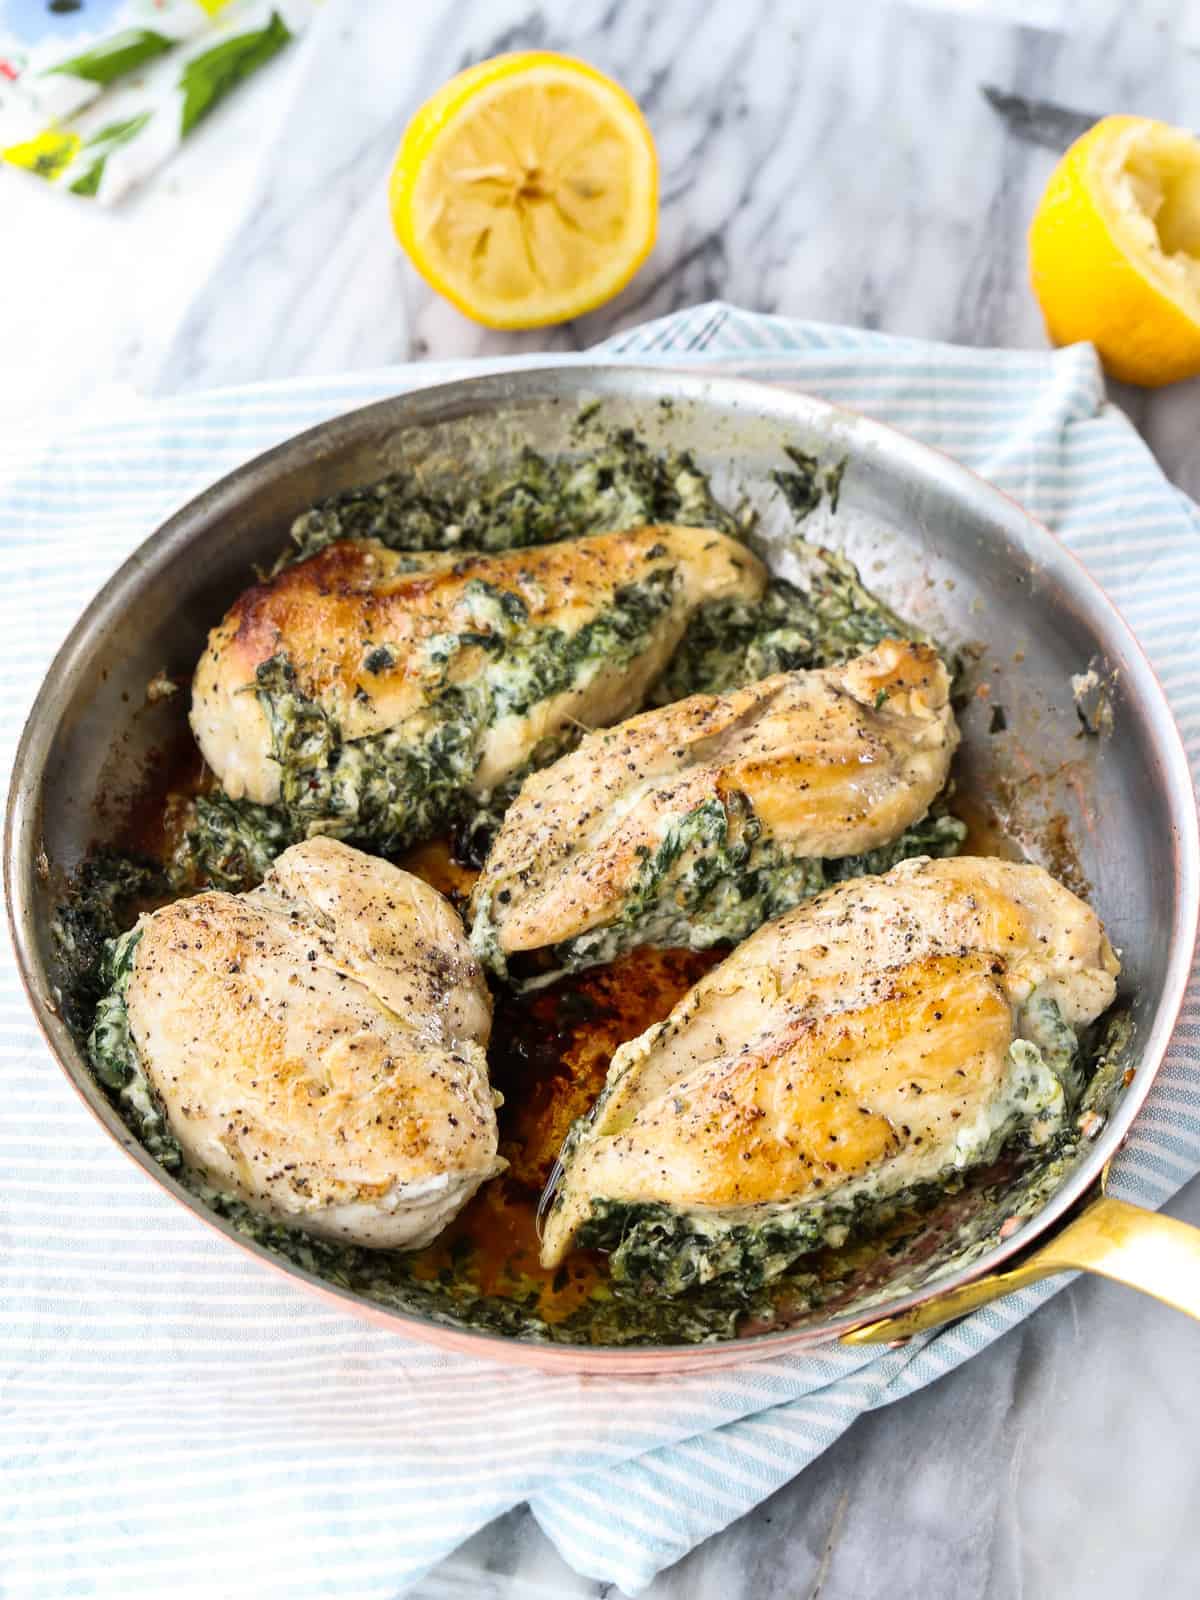 Four cooked chicken breasts stuffed with a creamy spinach mixture in a skillet.